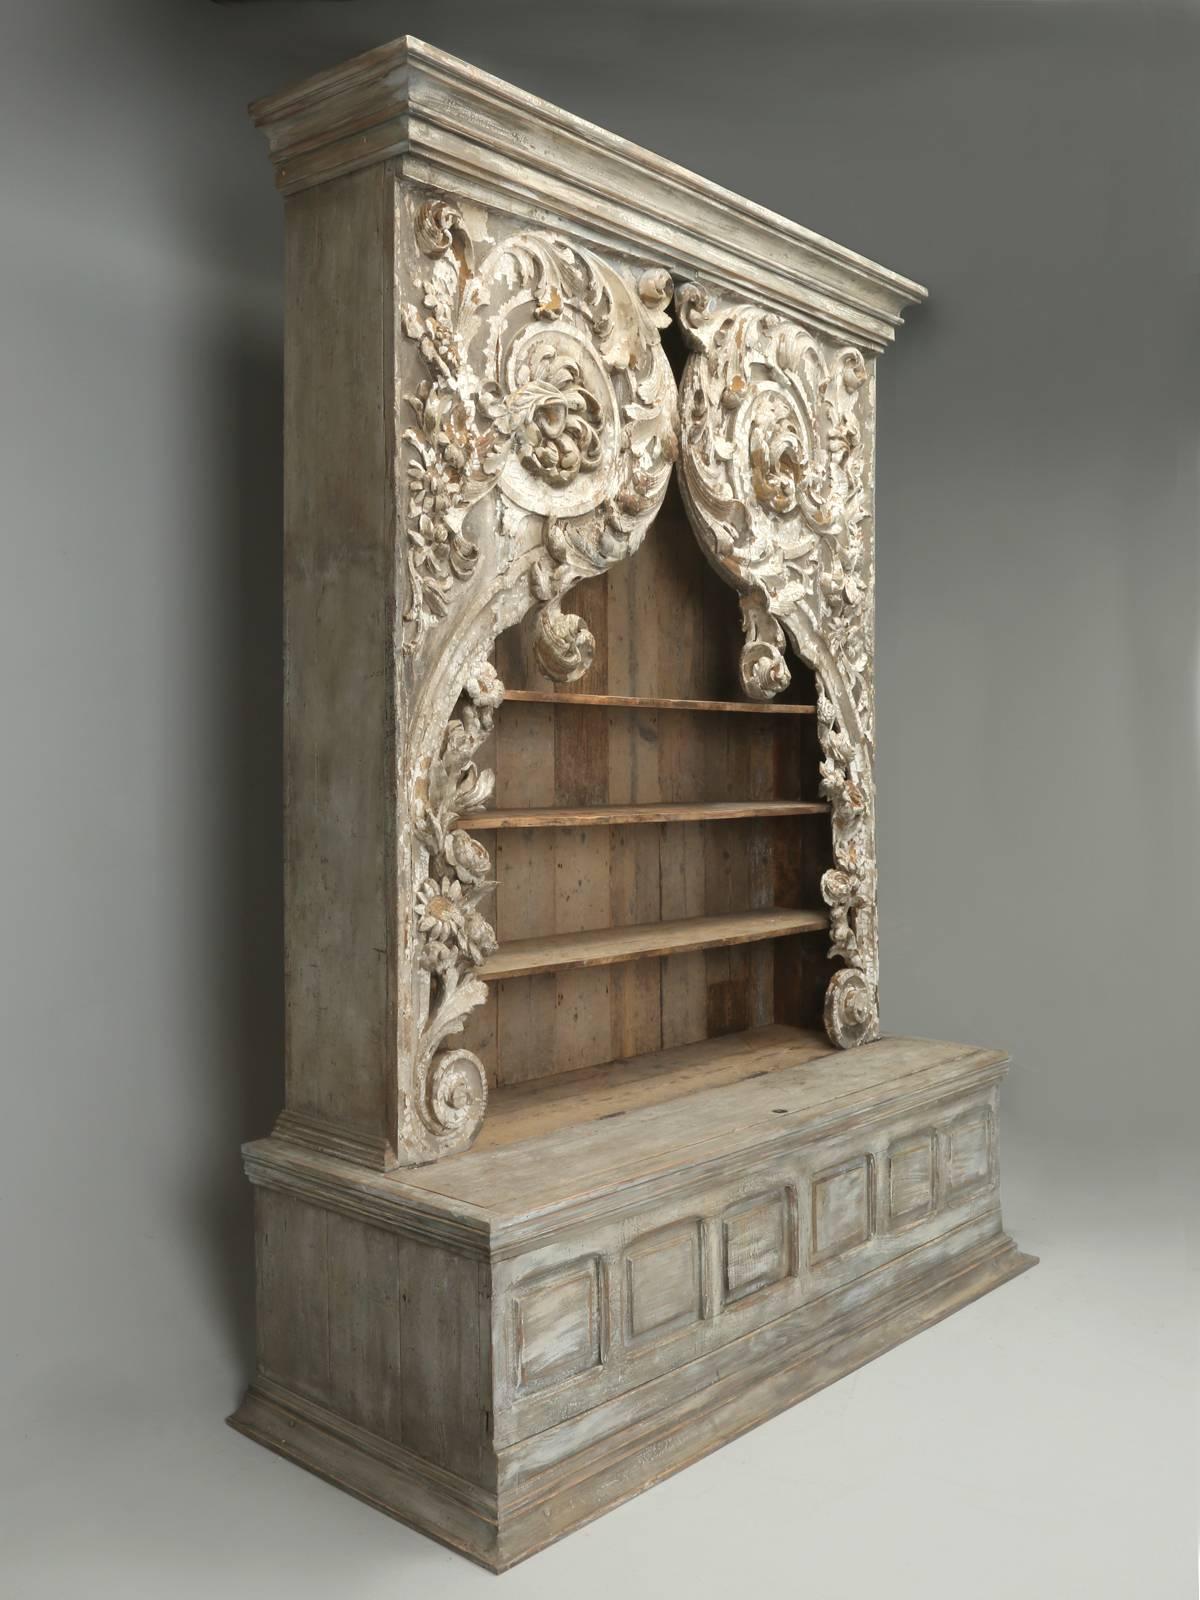 This unbelievable carved bookcase, was found in the home of a retired antique dealer, who resided in a small rural French village, in the south of France. Every item in her home, showcased a woman with a great appreciation for beauty and a